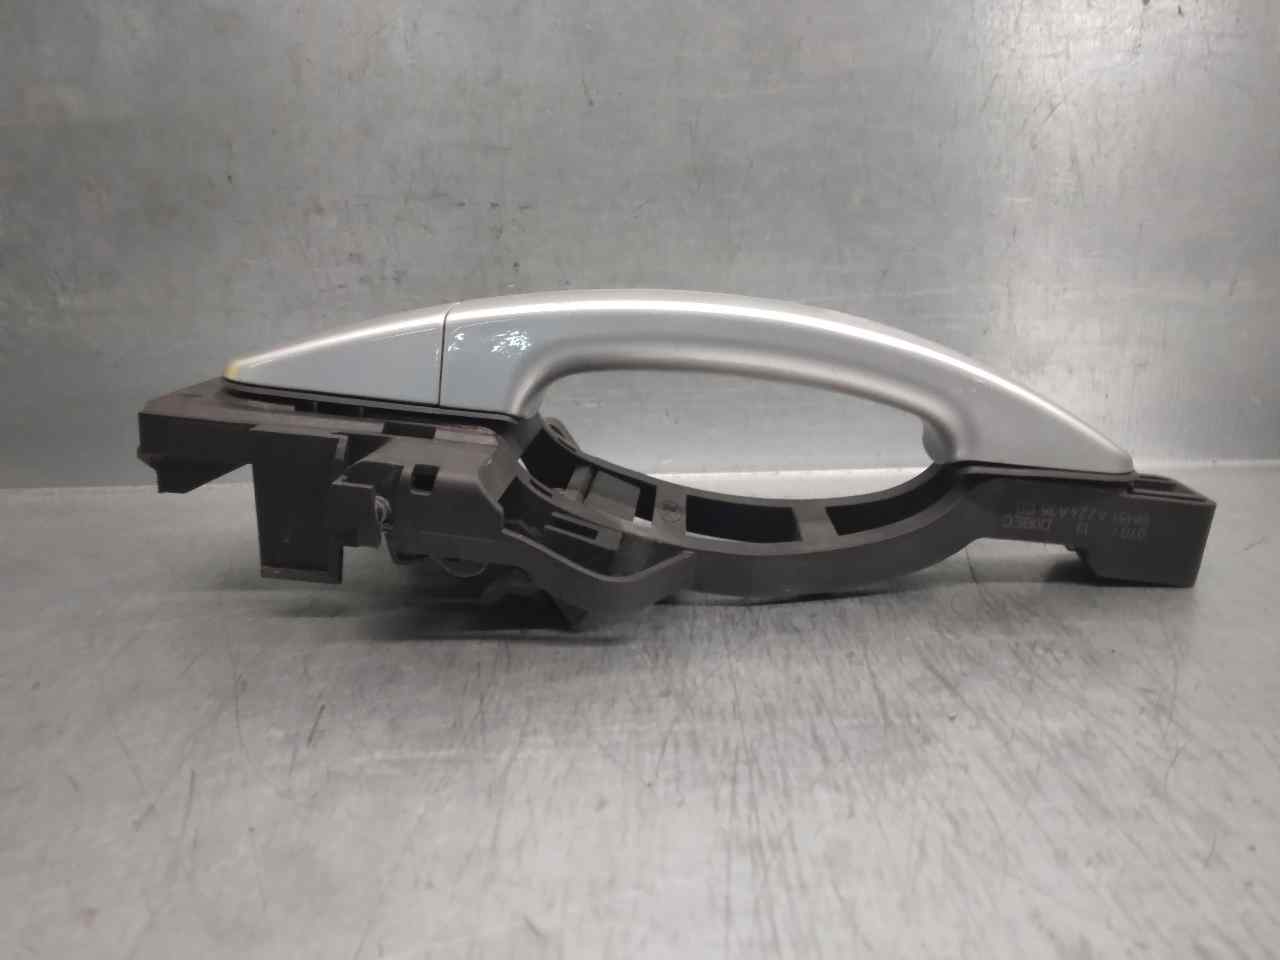 FORD Focus 3 generation (2011-2020) Rear right door outer handle BM51A224A36CG, 5PUERTAS 19863987